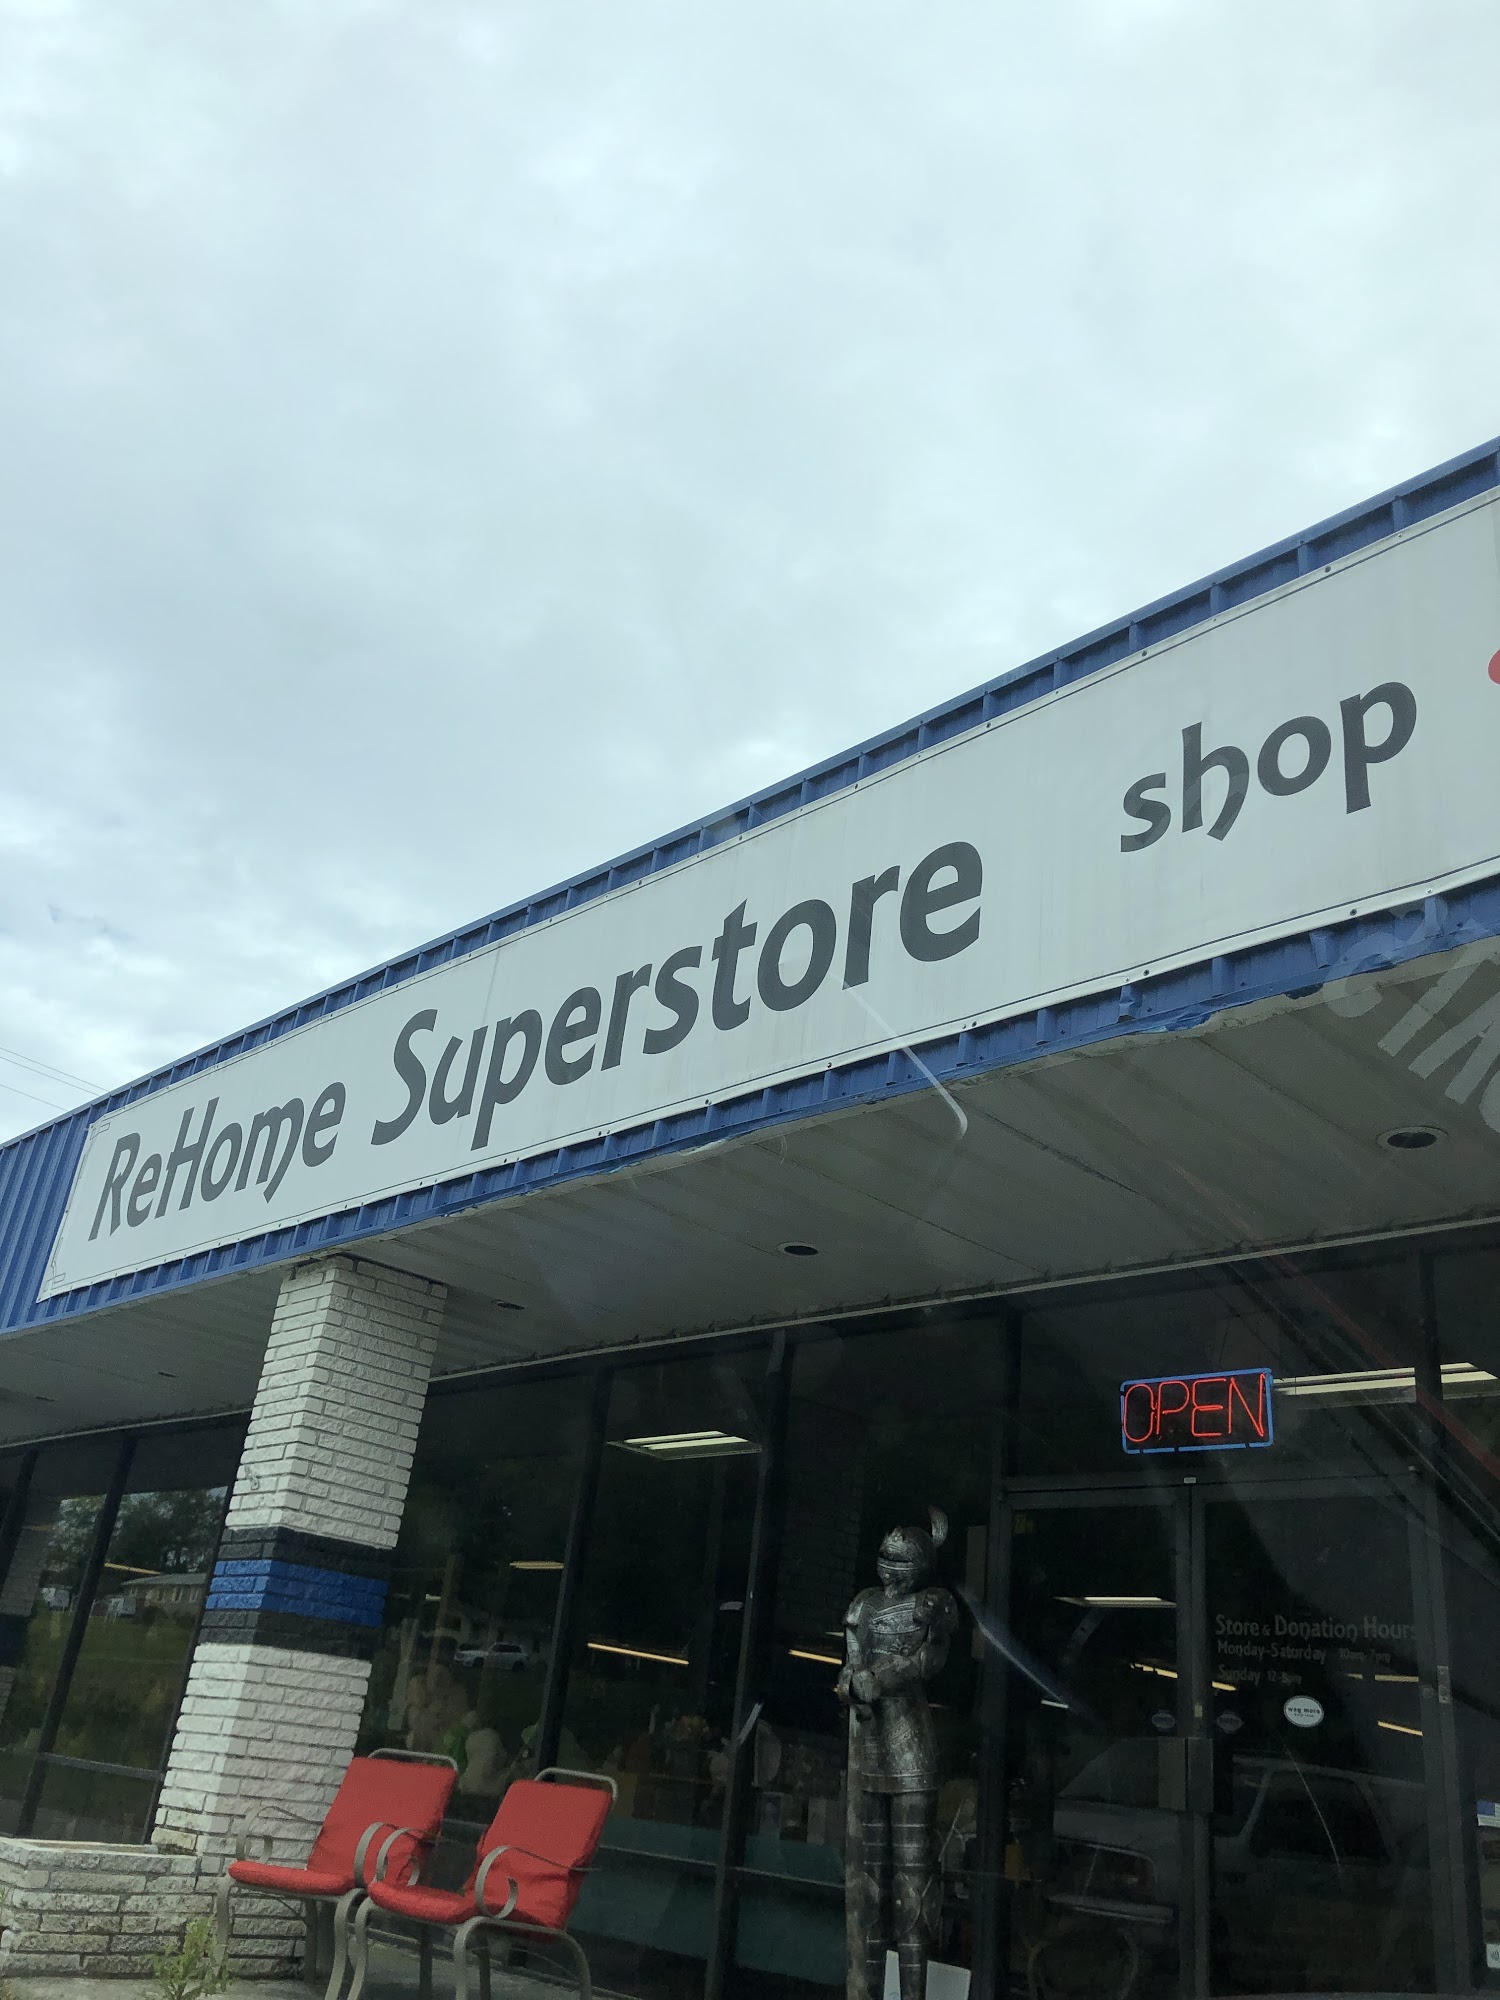 ReHome Superstore